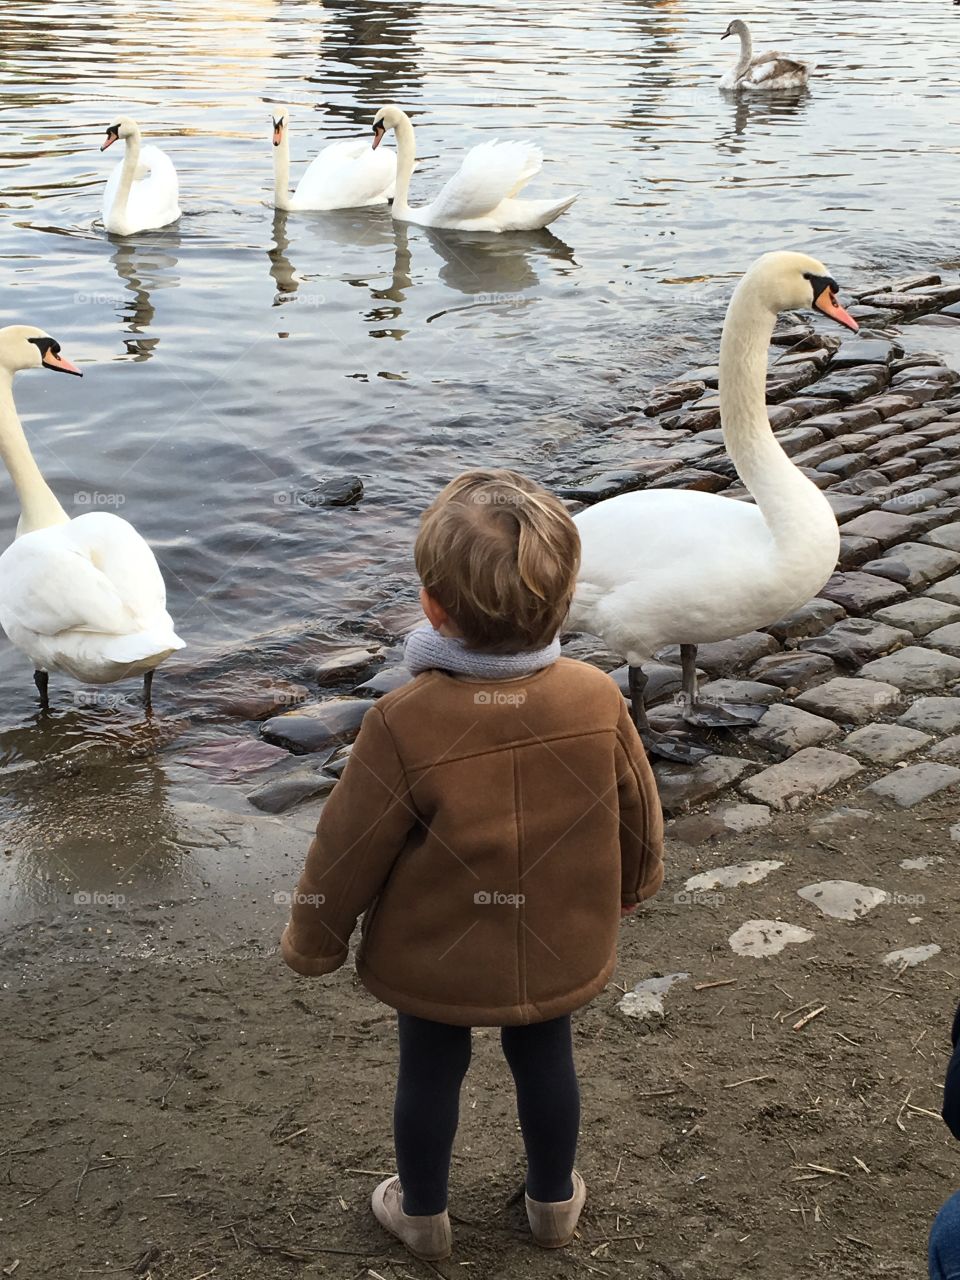 A kid and swans